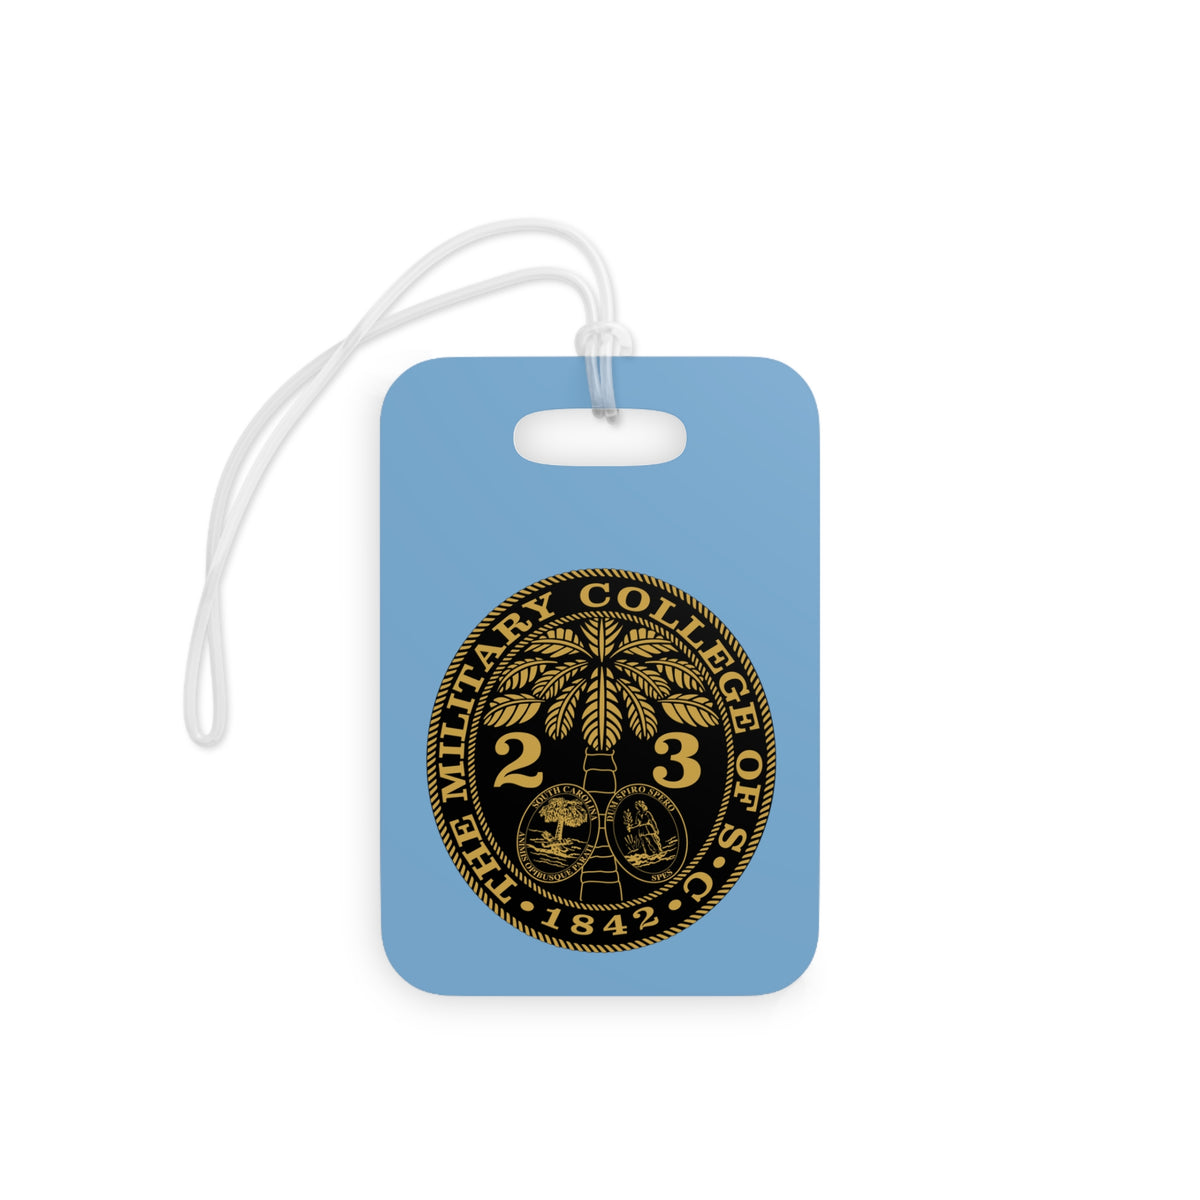 The Citadel, Class of 2023 Double Sided Luggage Tag